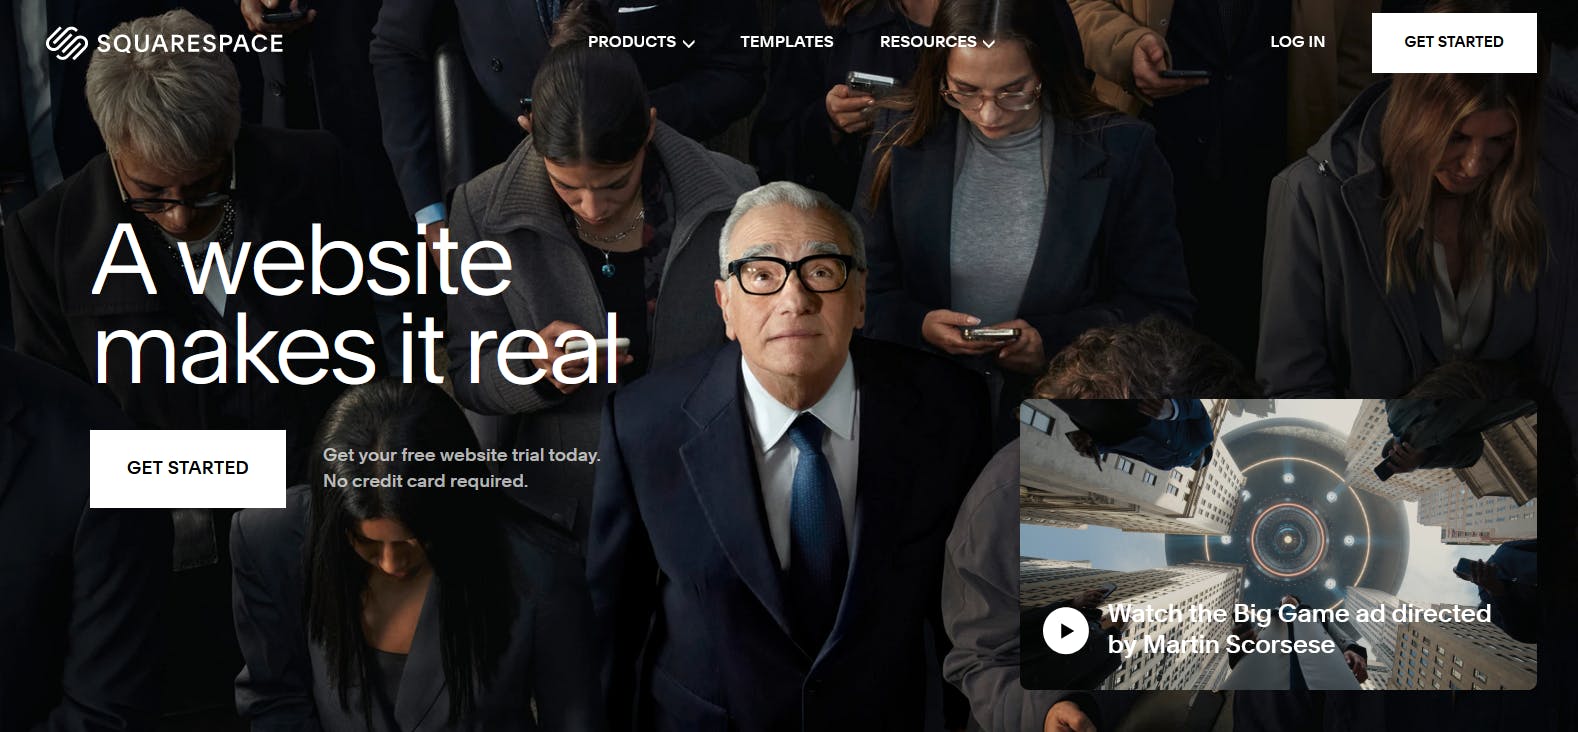 An image of Squarespace landing page.